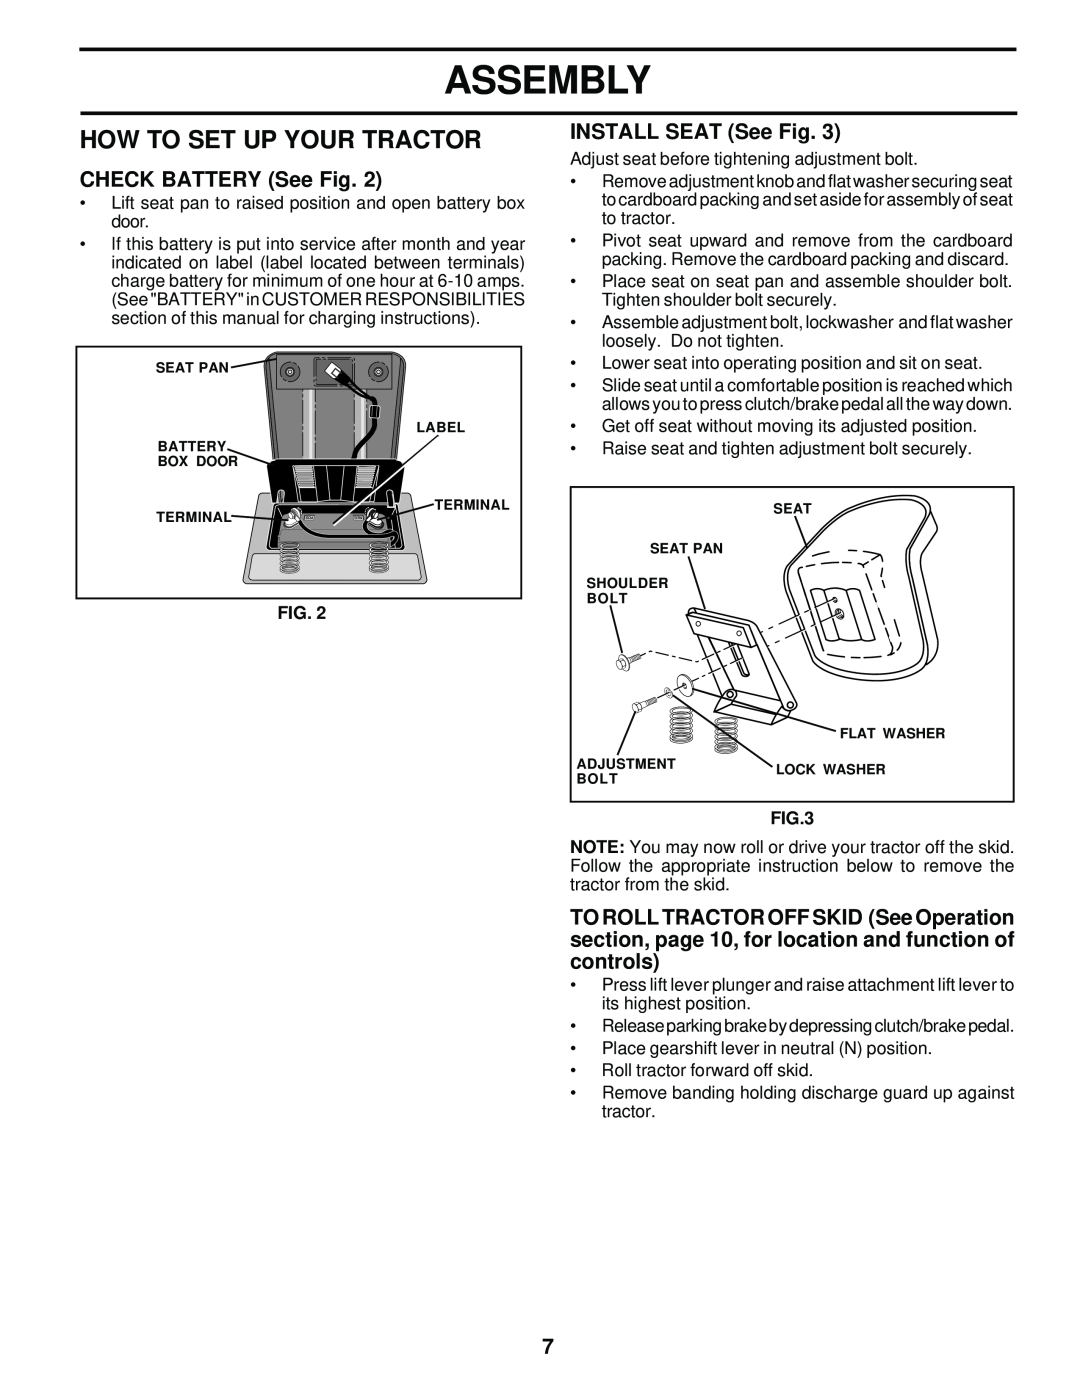 Weed Eater 171883 manual How To Set Up Your Tractor, CHECK BATTERY See Fig, INSTALL SEAT See Fig, Assembly 